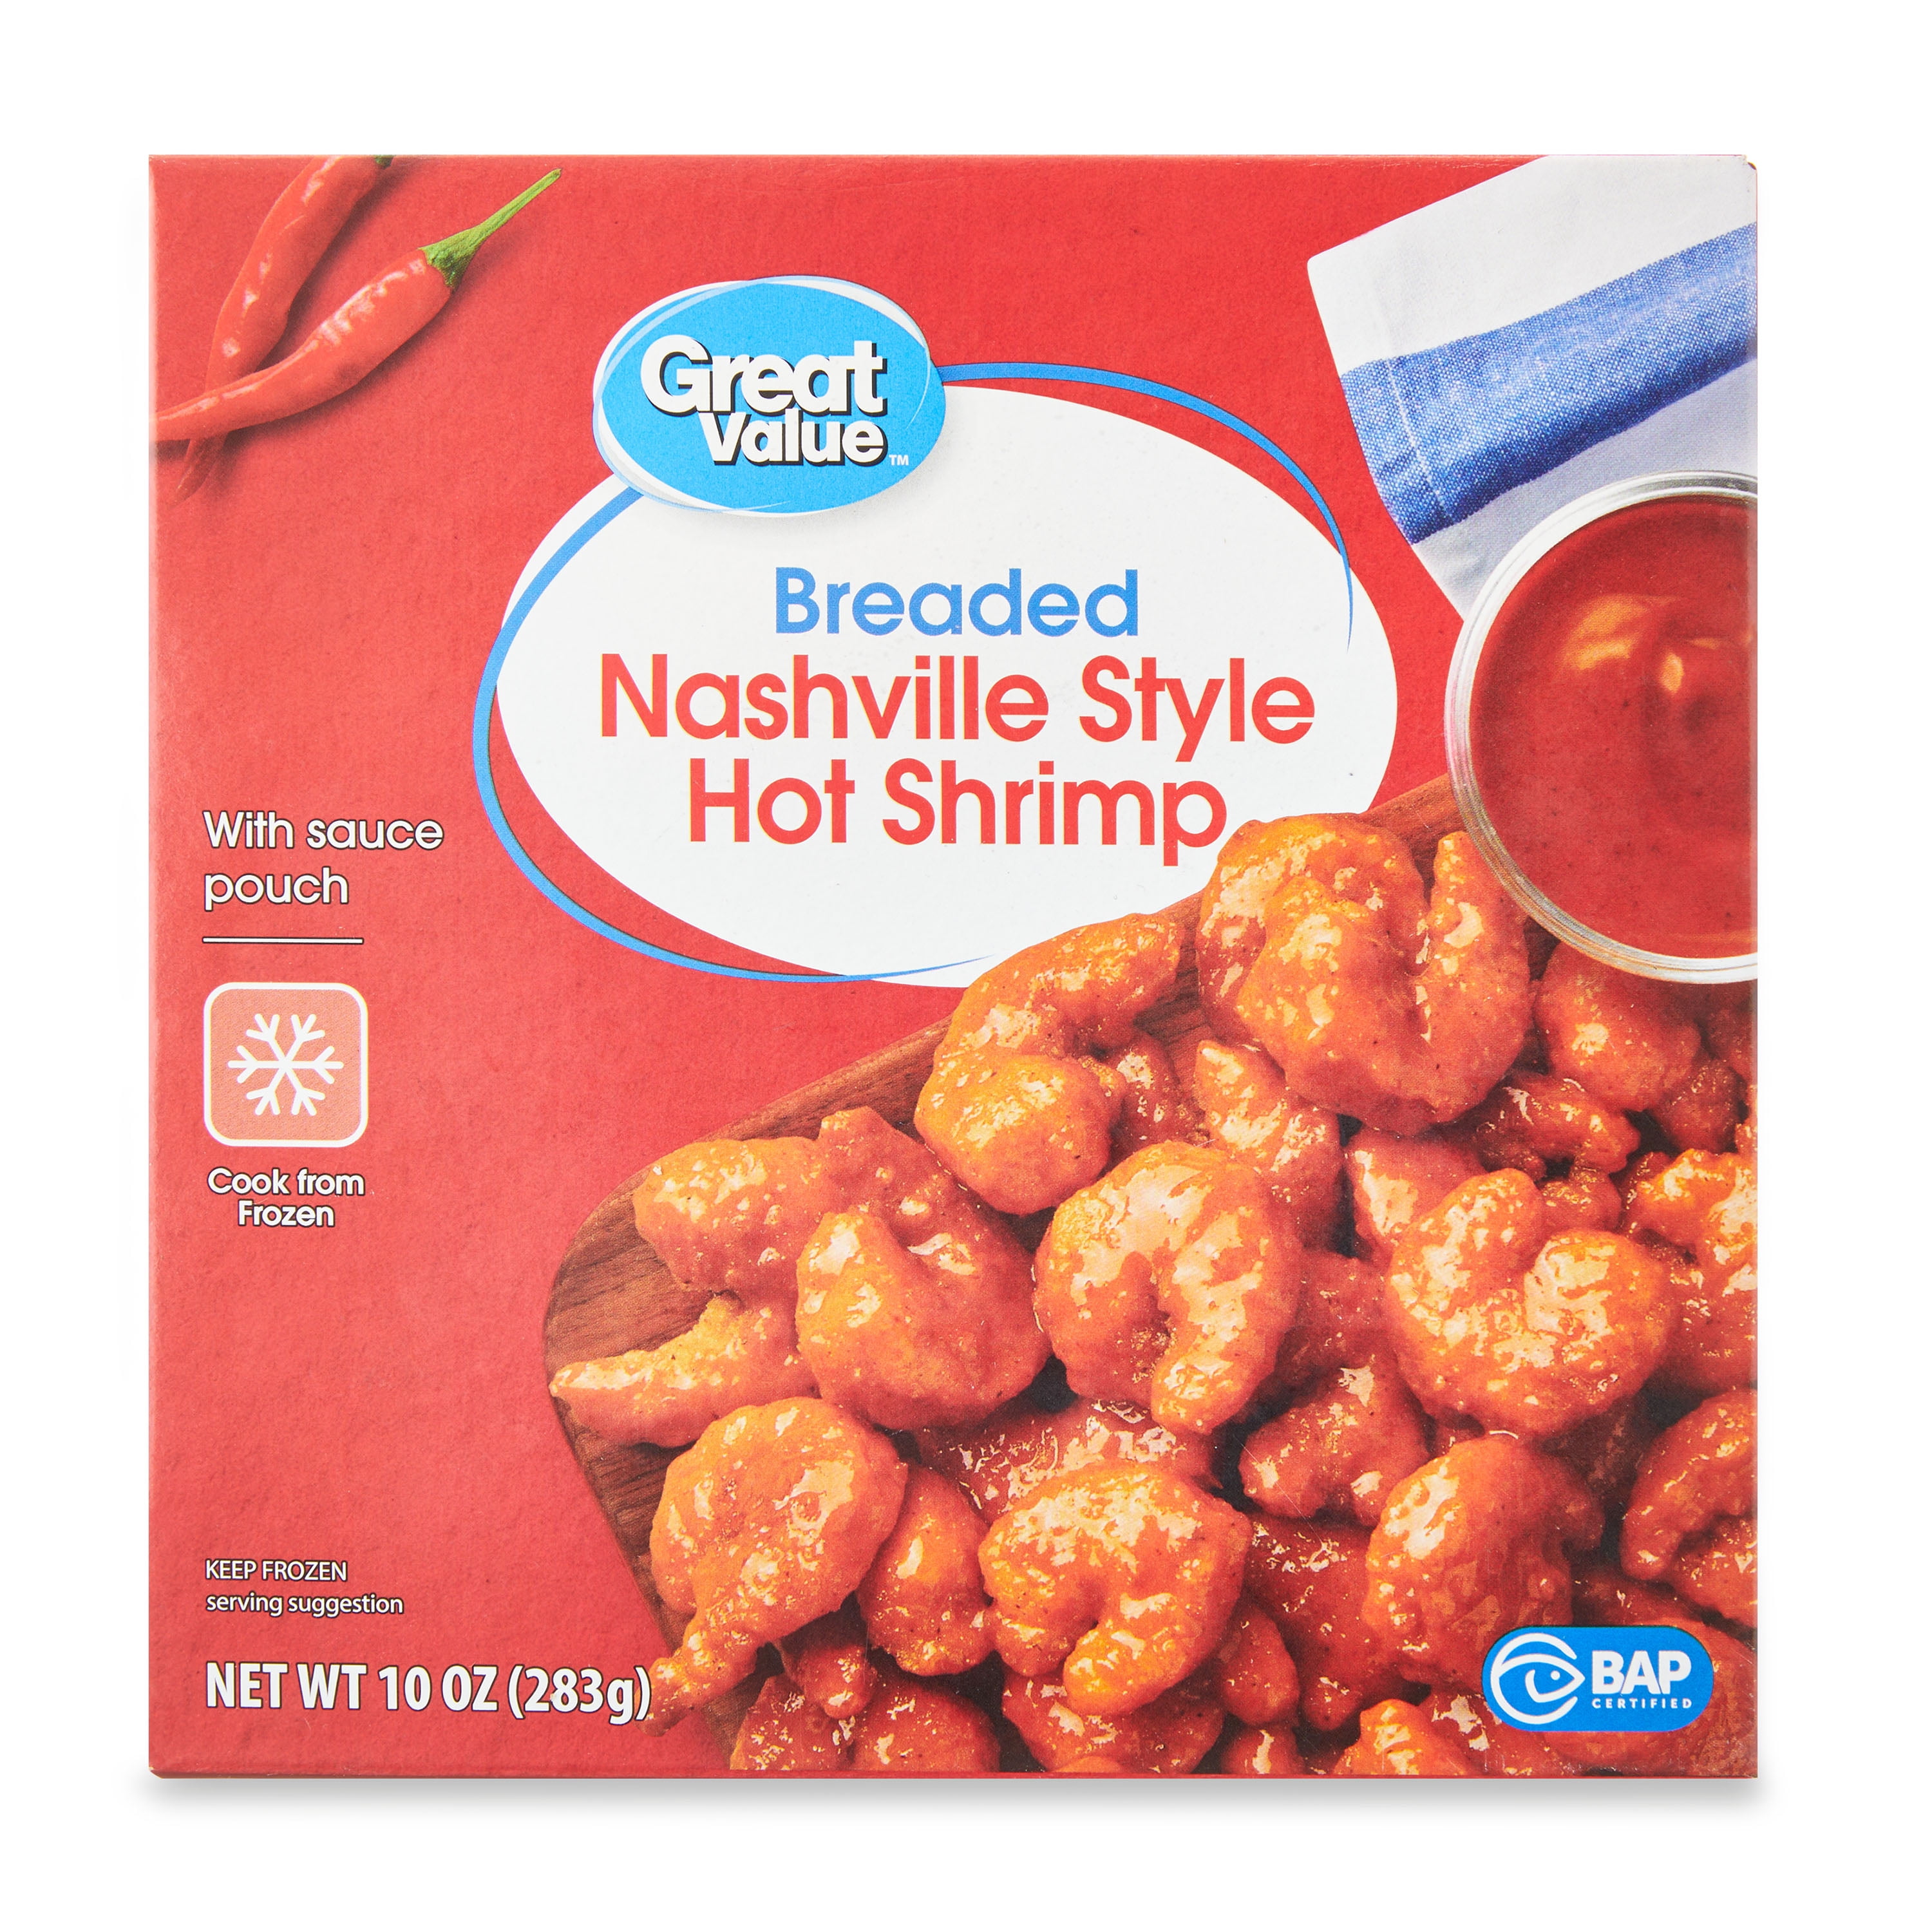 Great Value Breaded Nashville Style Hot Shrimp with Sauce, Frozen Meal, 10  Ounces (283g) 